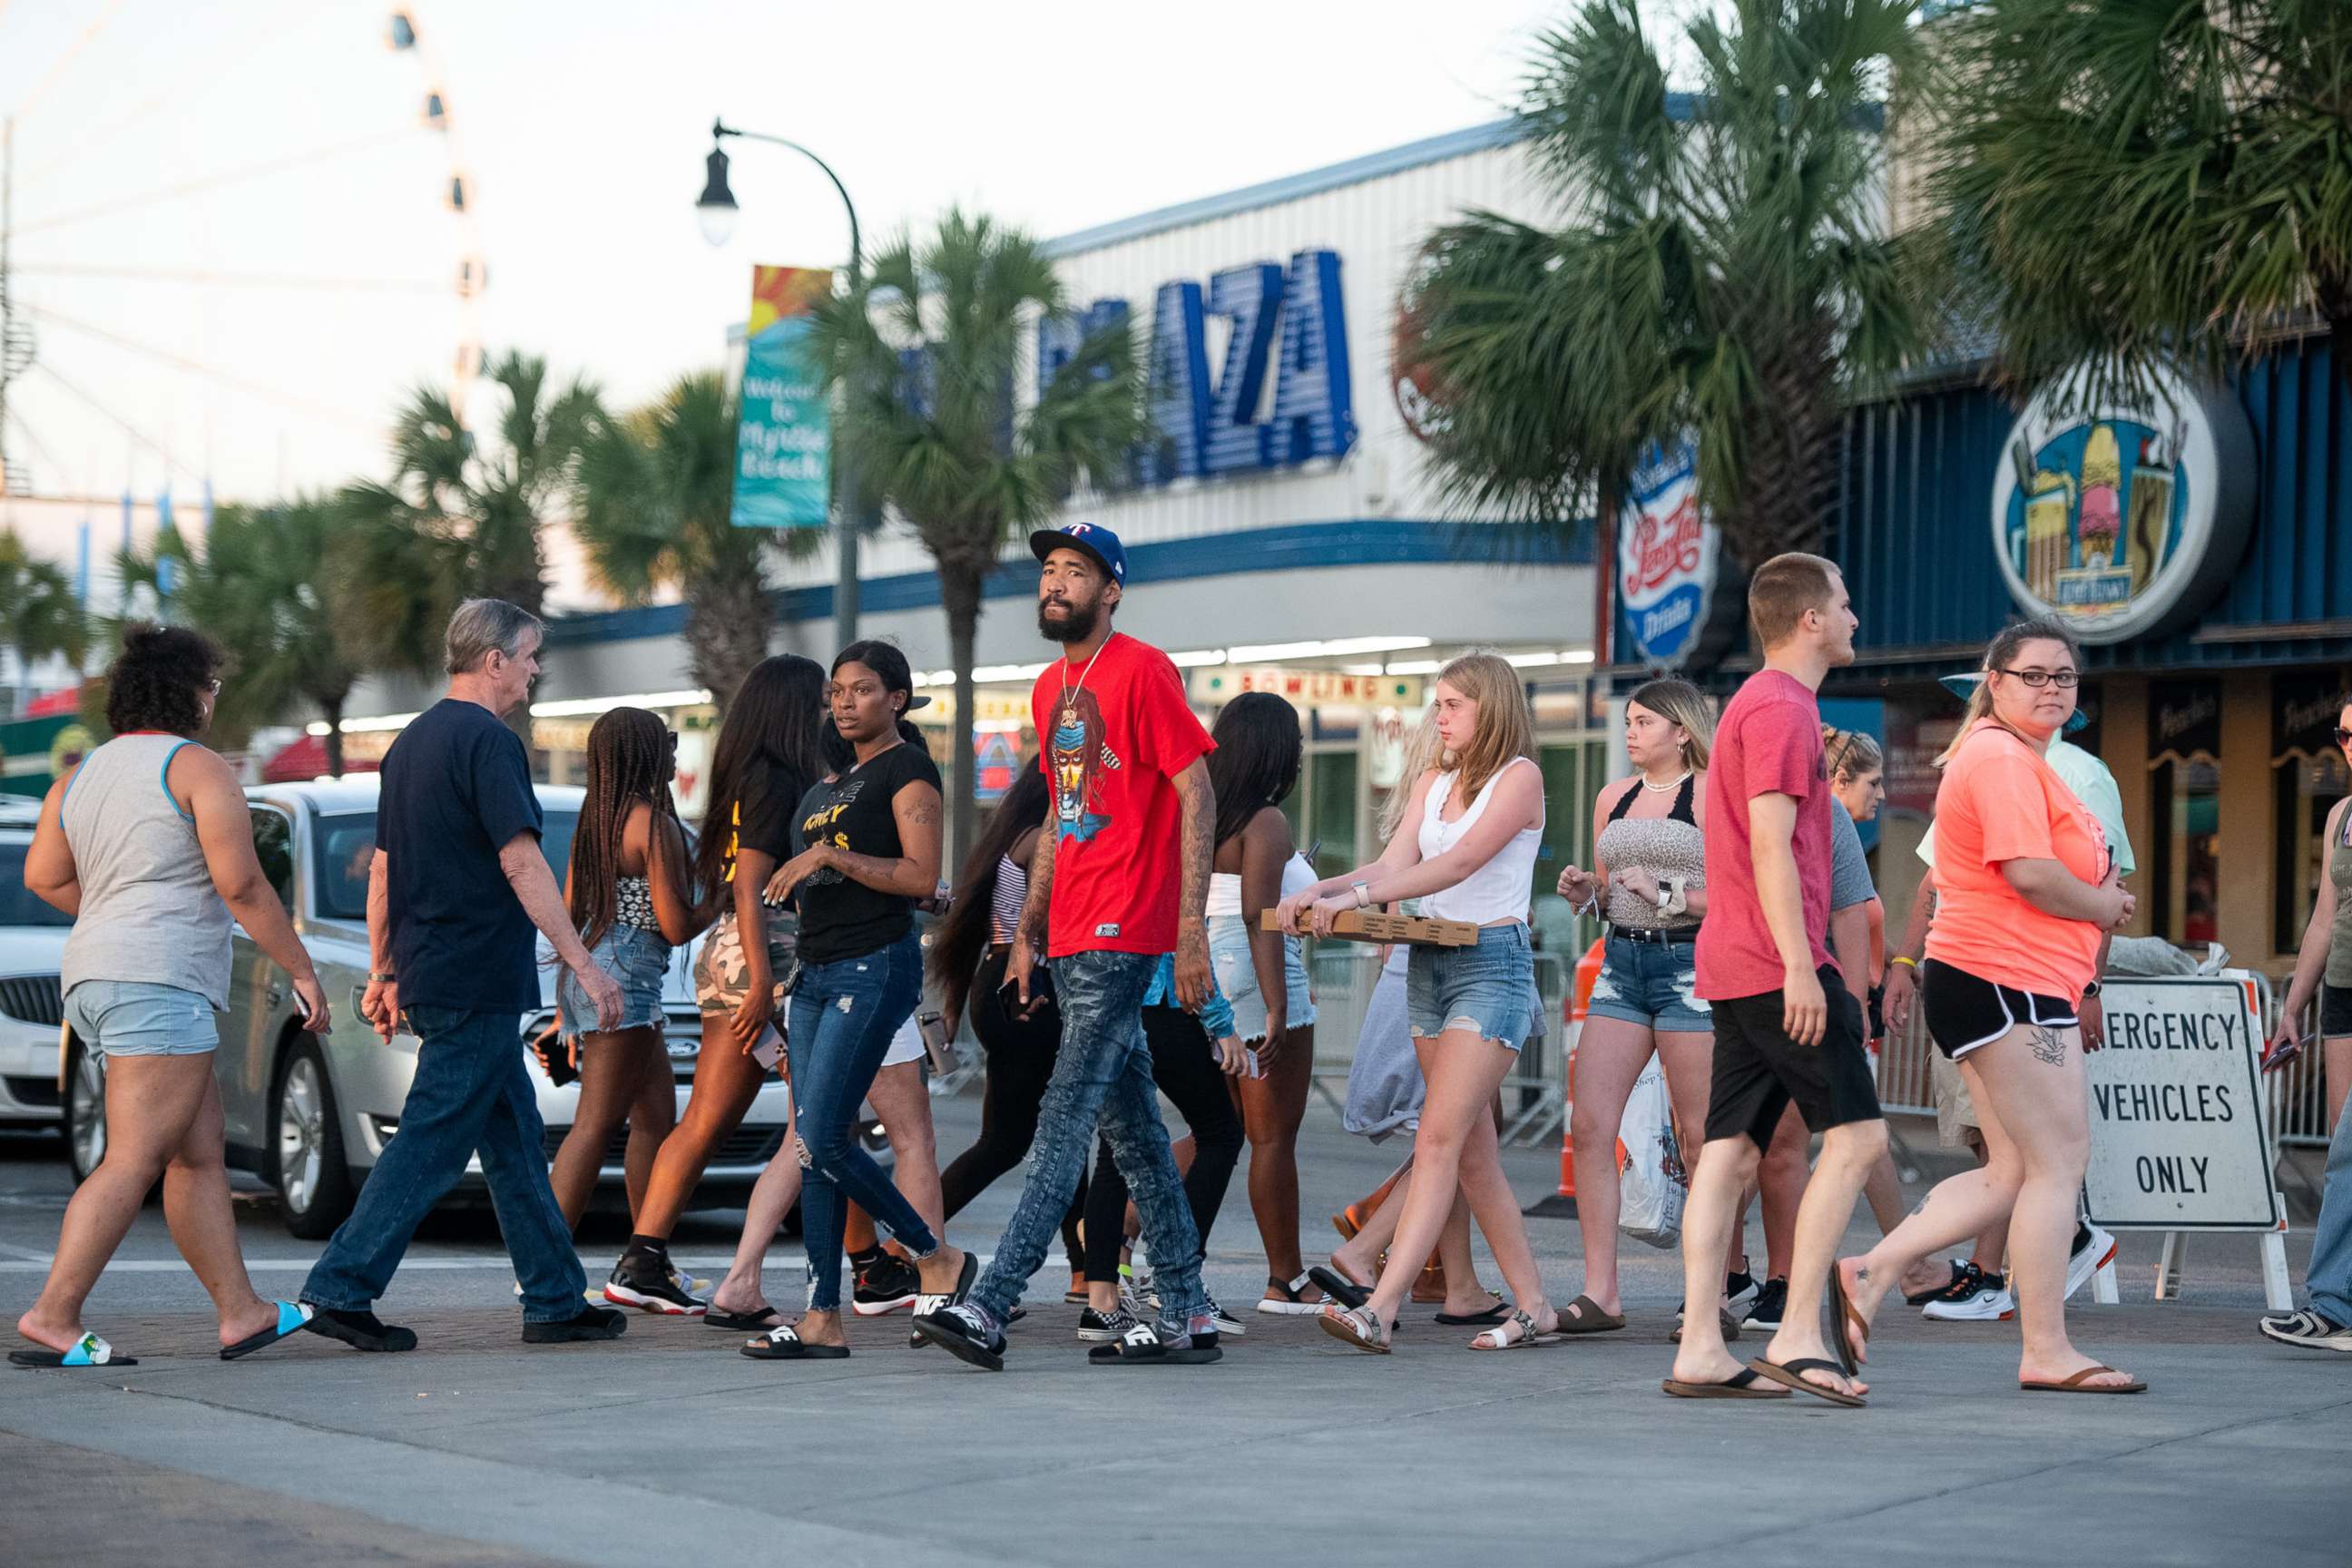 PHOTO: In this May 23, 2020, file photo, people cross N. Ocean Blvd. in Myrtle Beach, South Carolina.